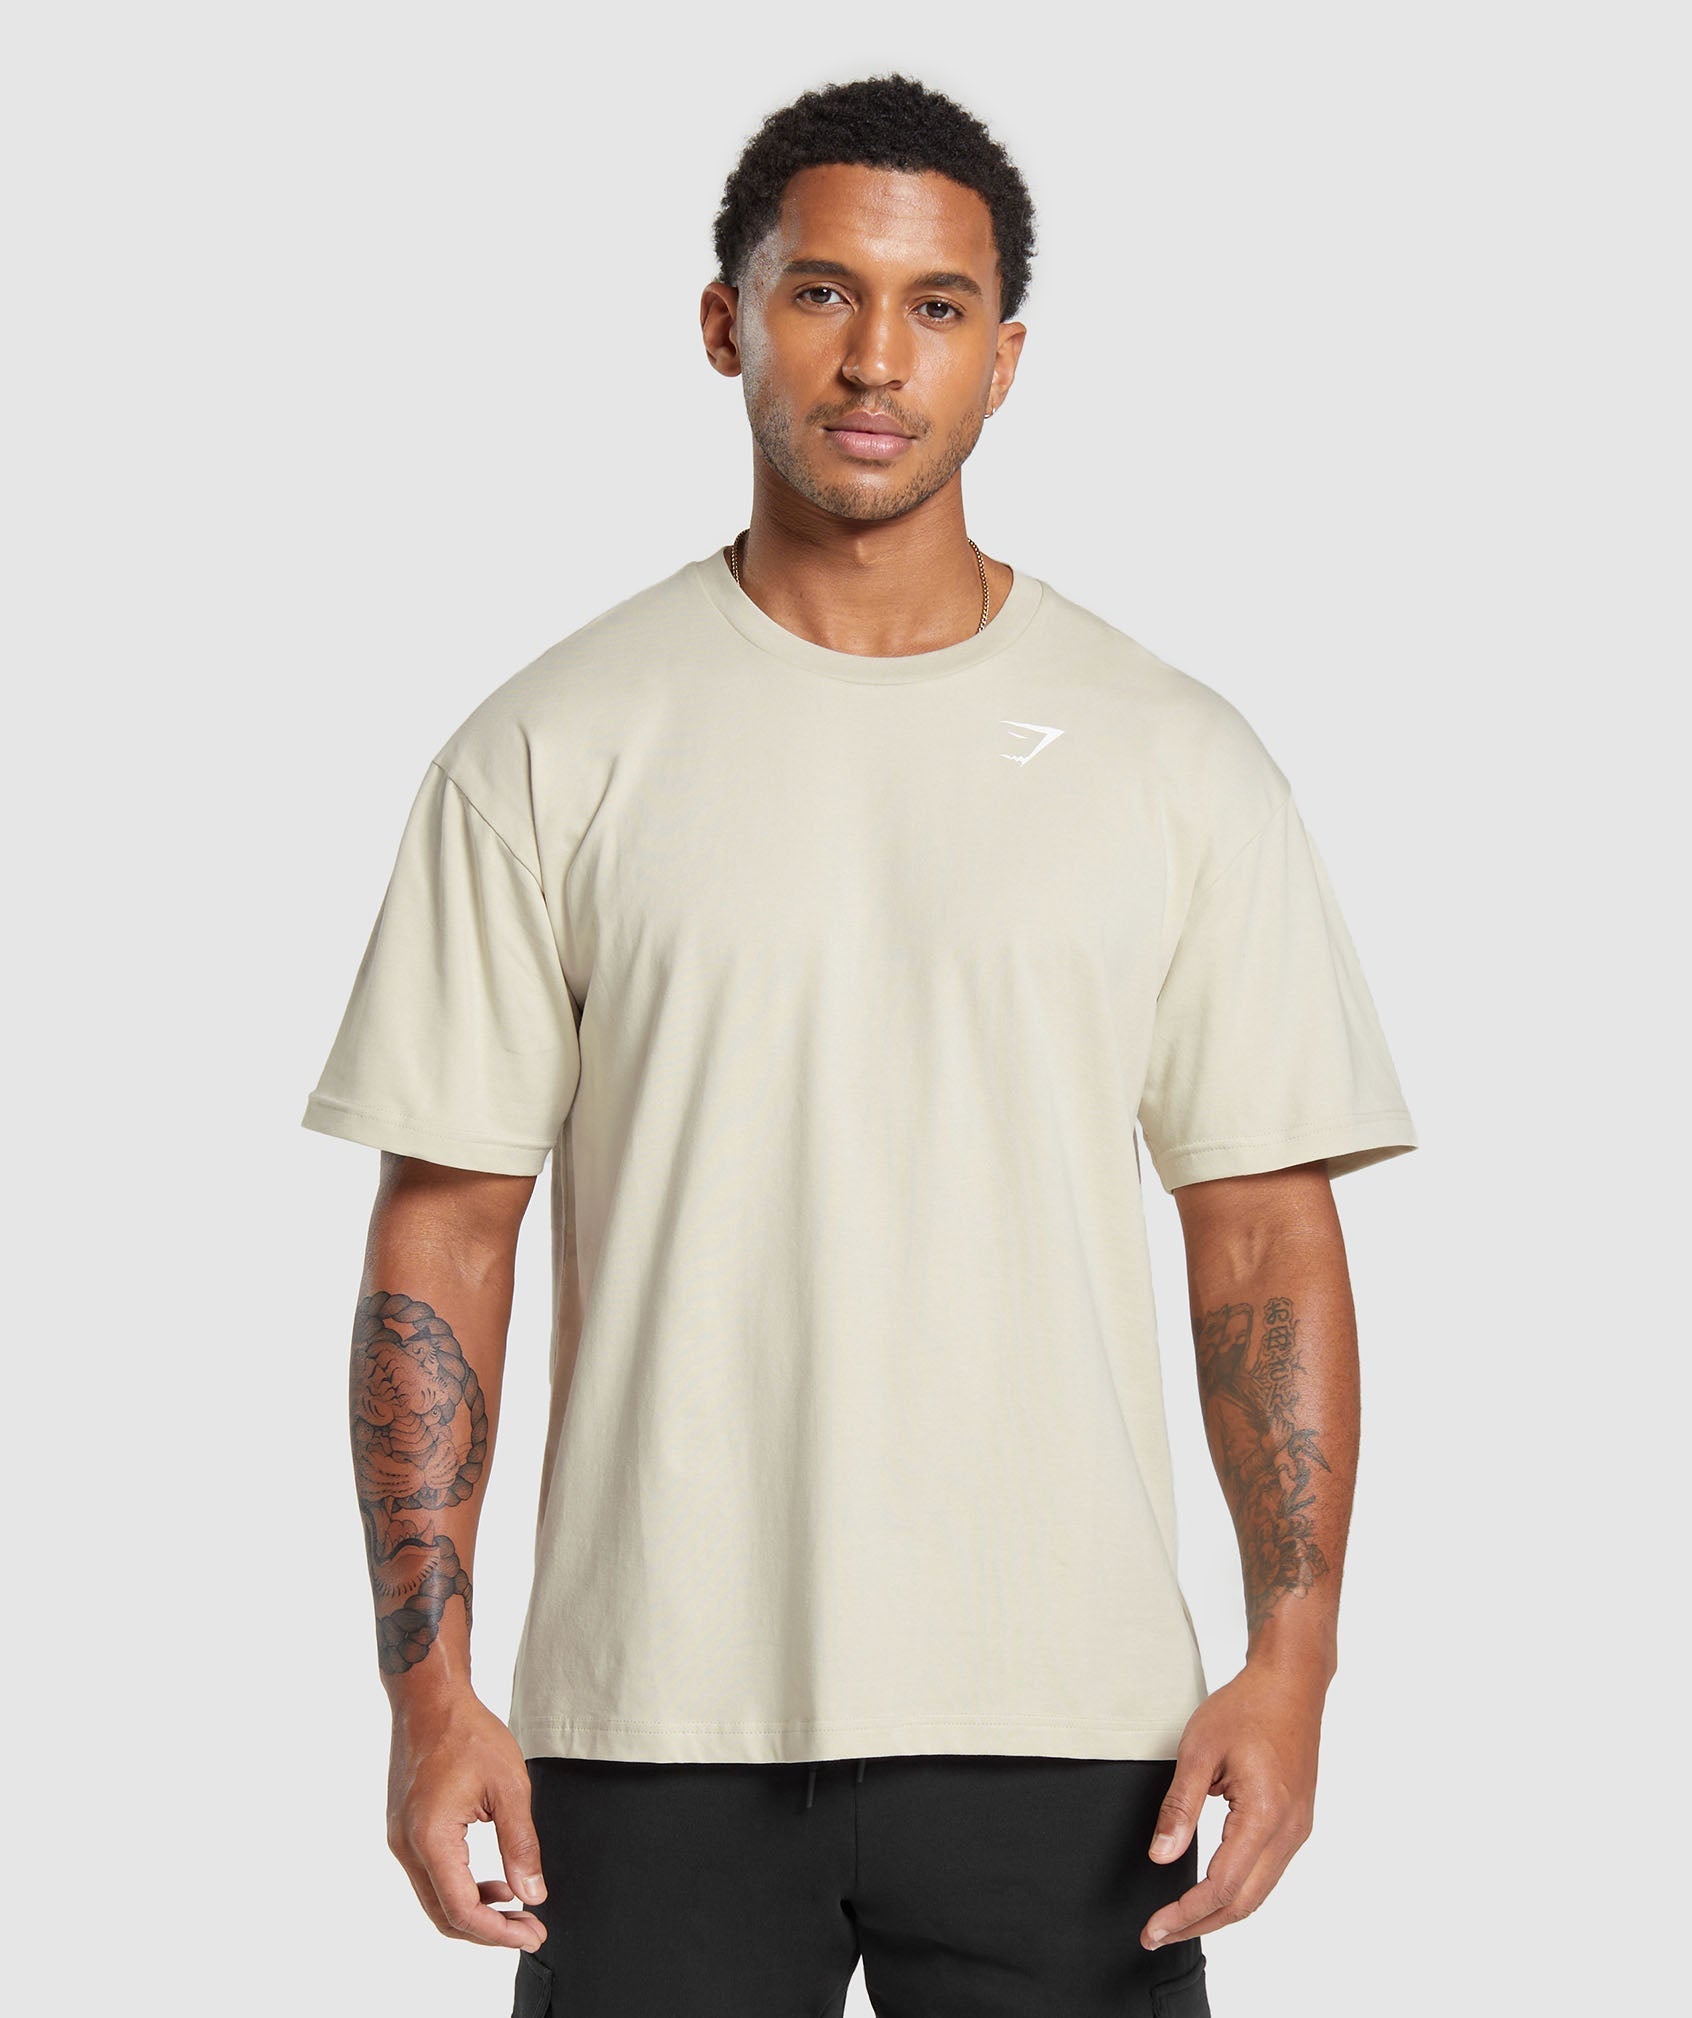 Essential Oversized T-Shirt in Pebble Grey - view 1